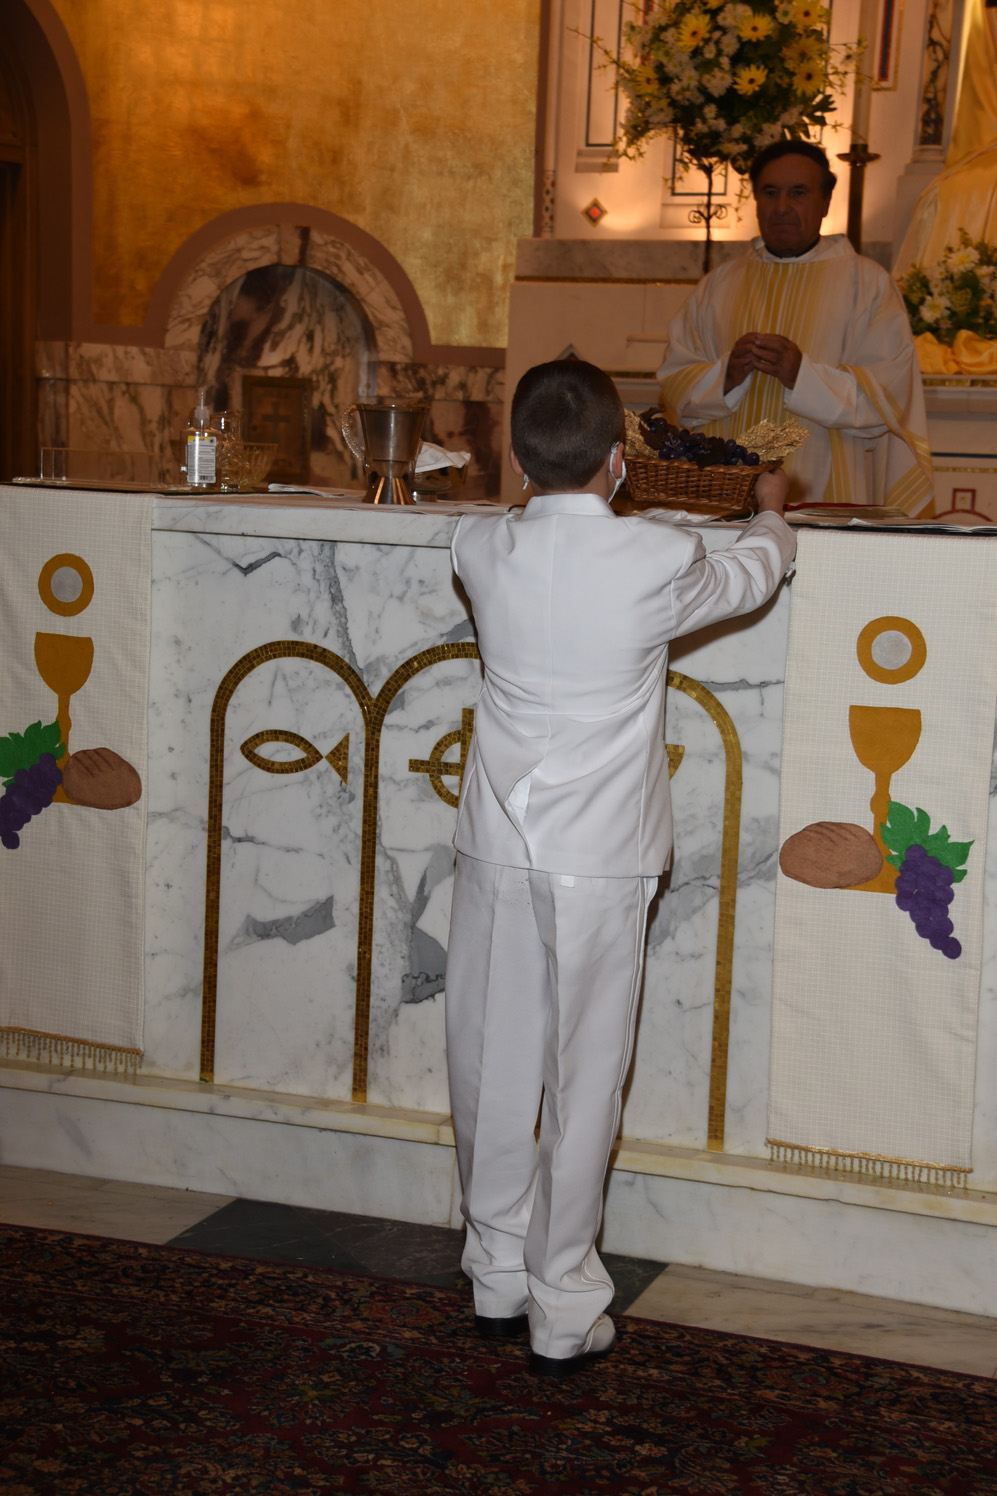 FIRST-COMMUNION-MAY-2-2021-1001001186